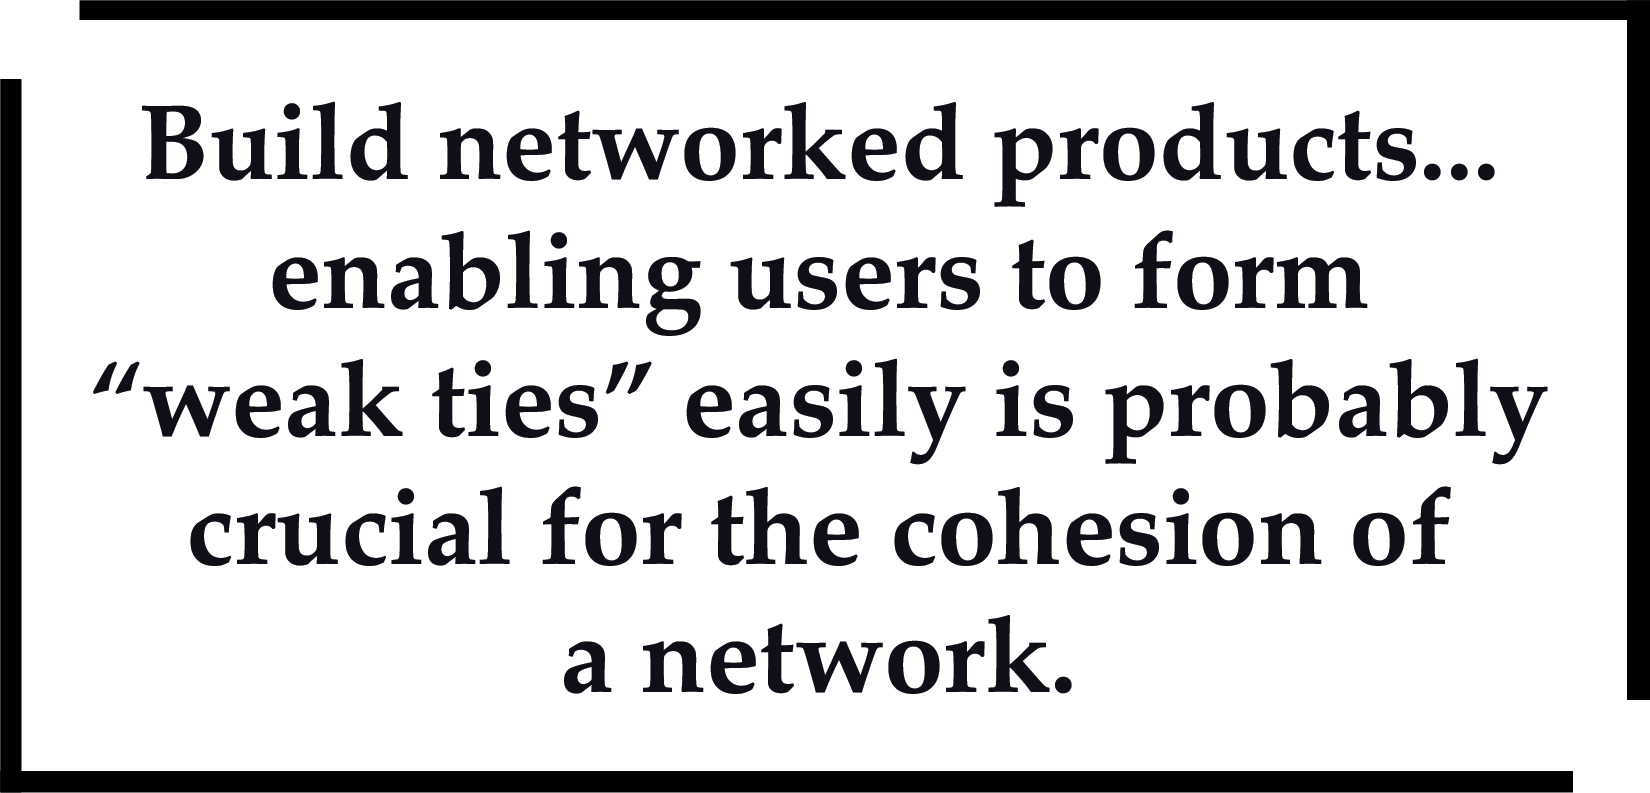 Build networked products enabling users to form 